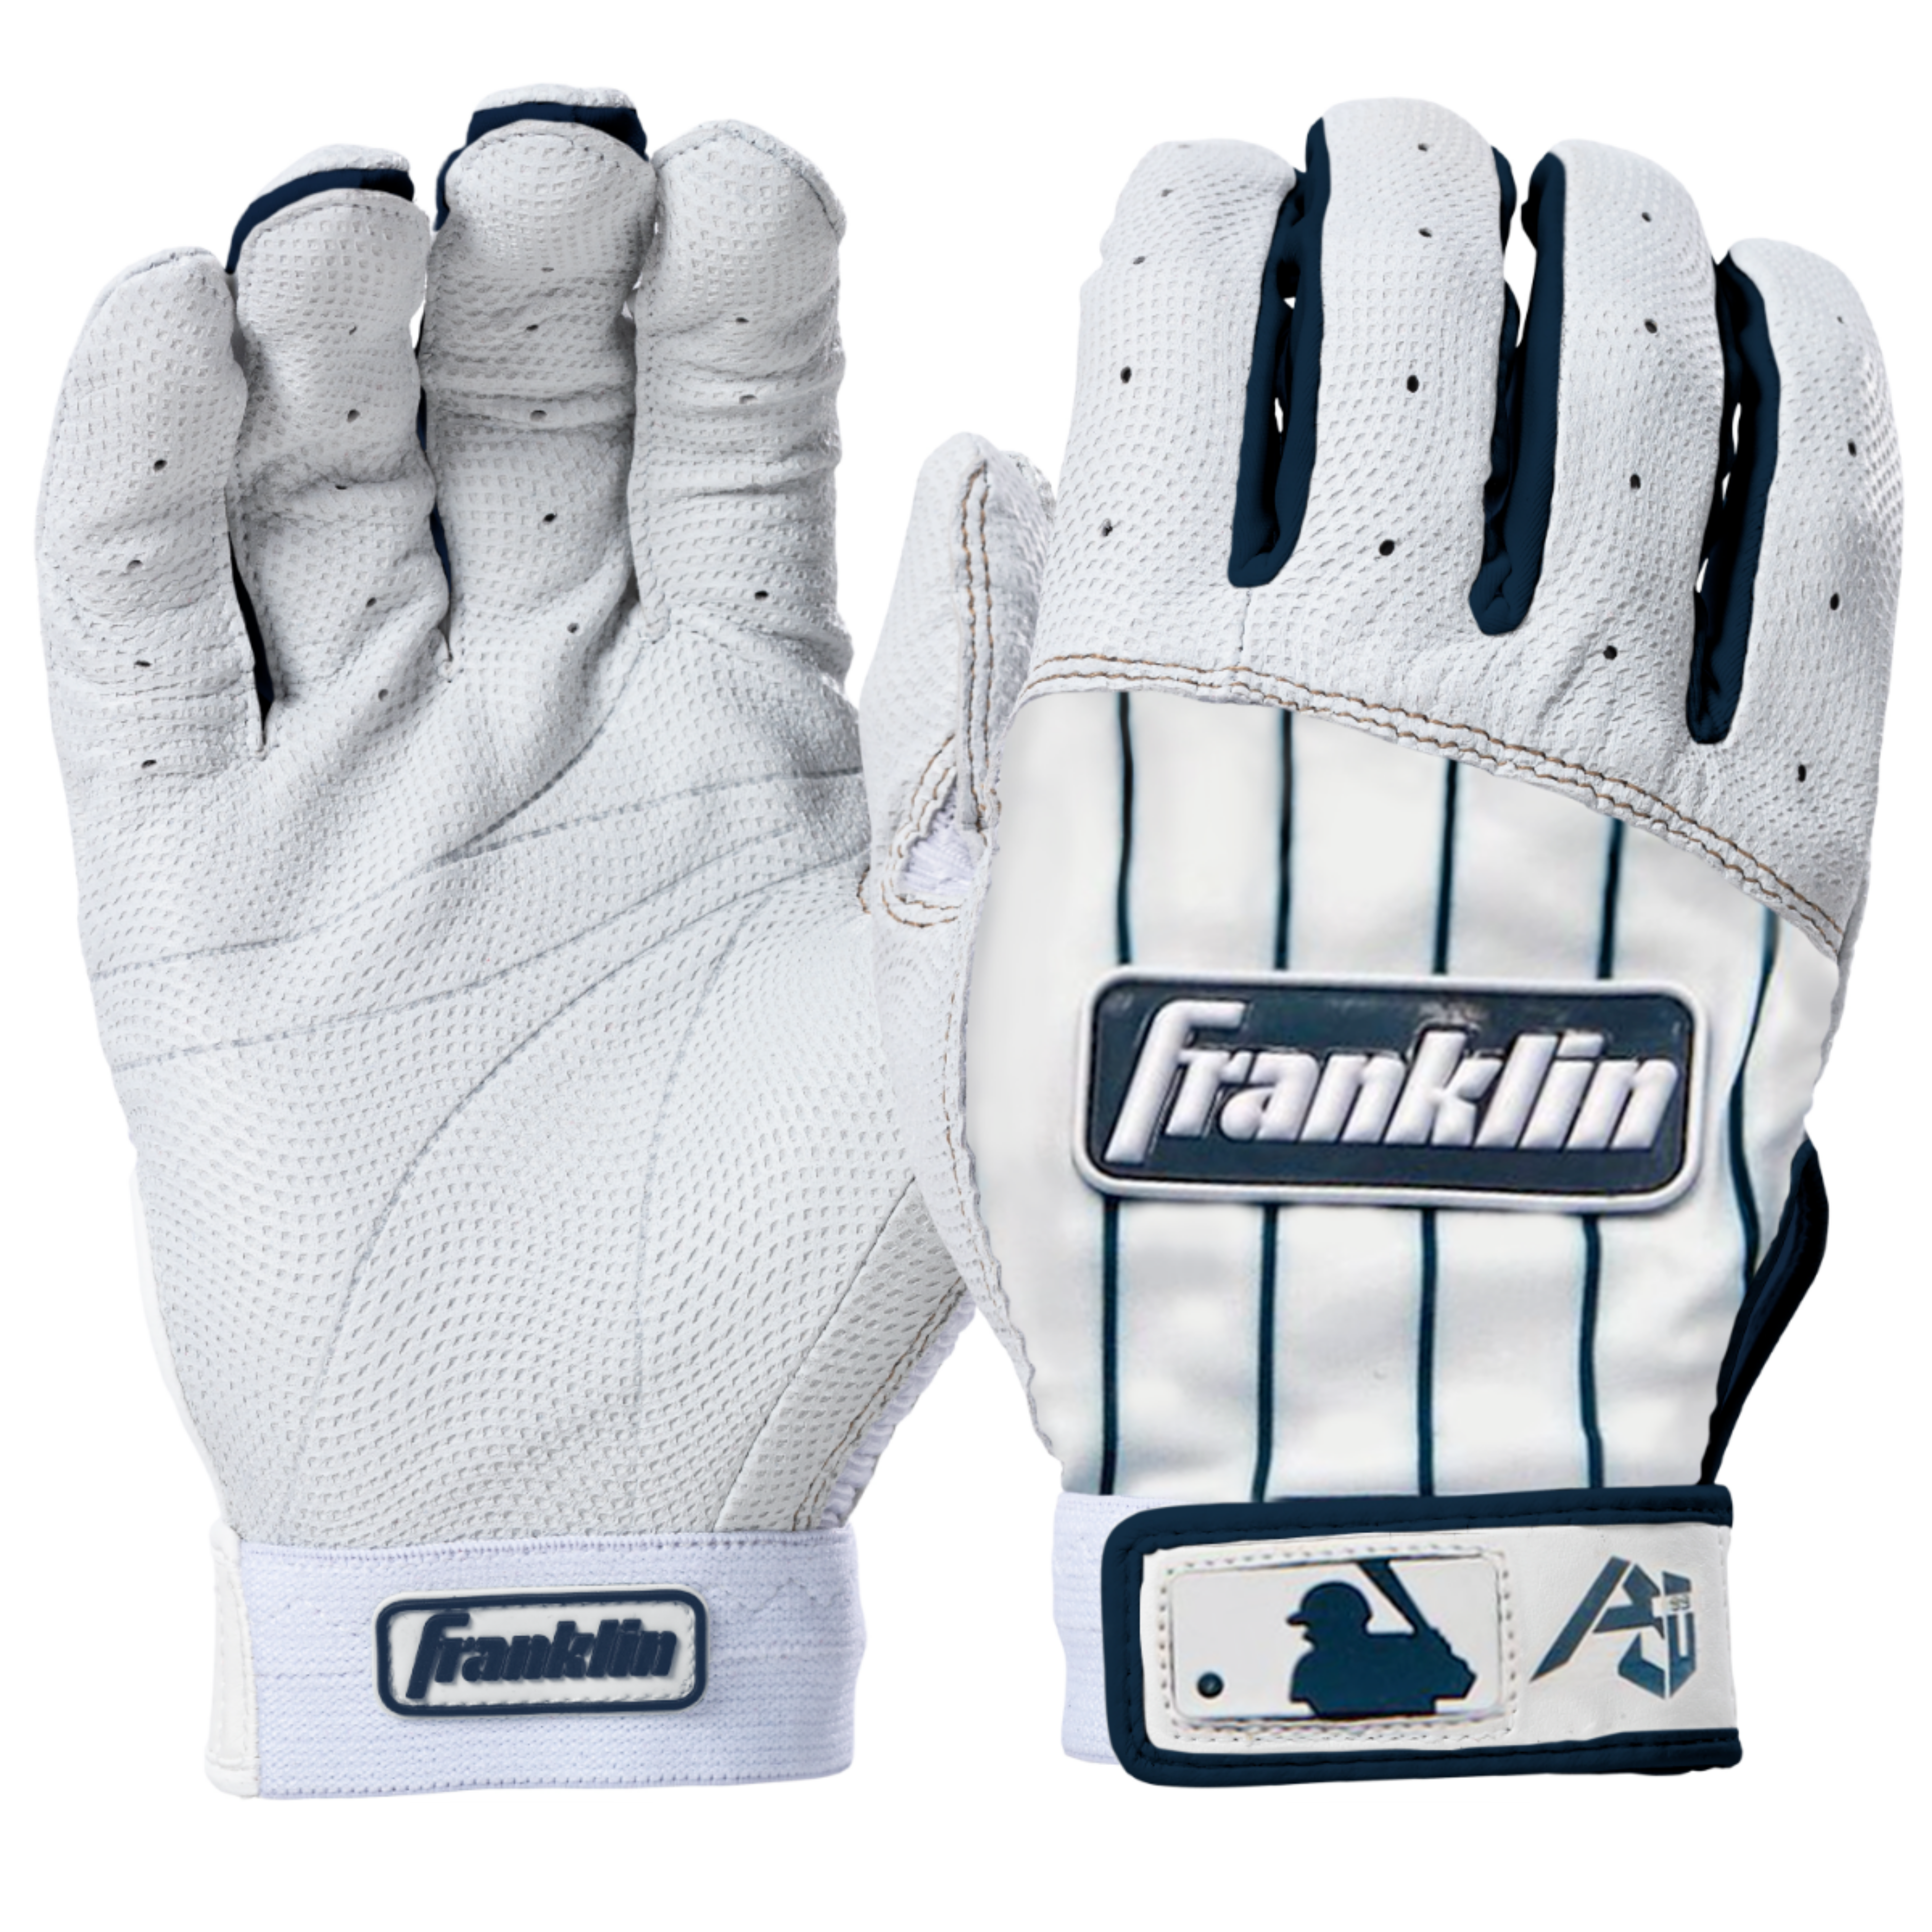 What Glove Does Aaron Judge Use?